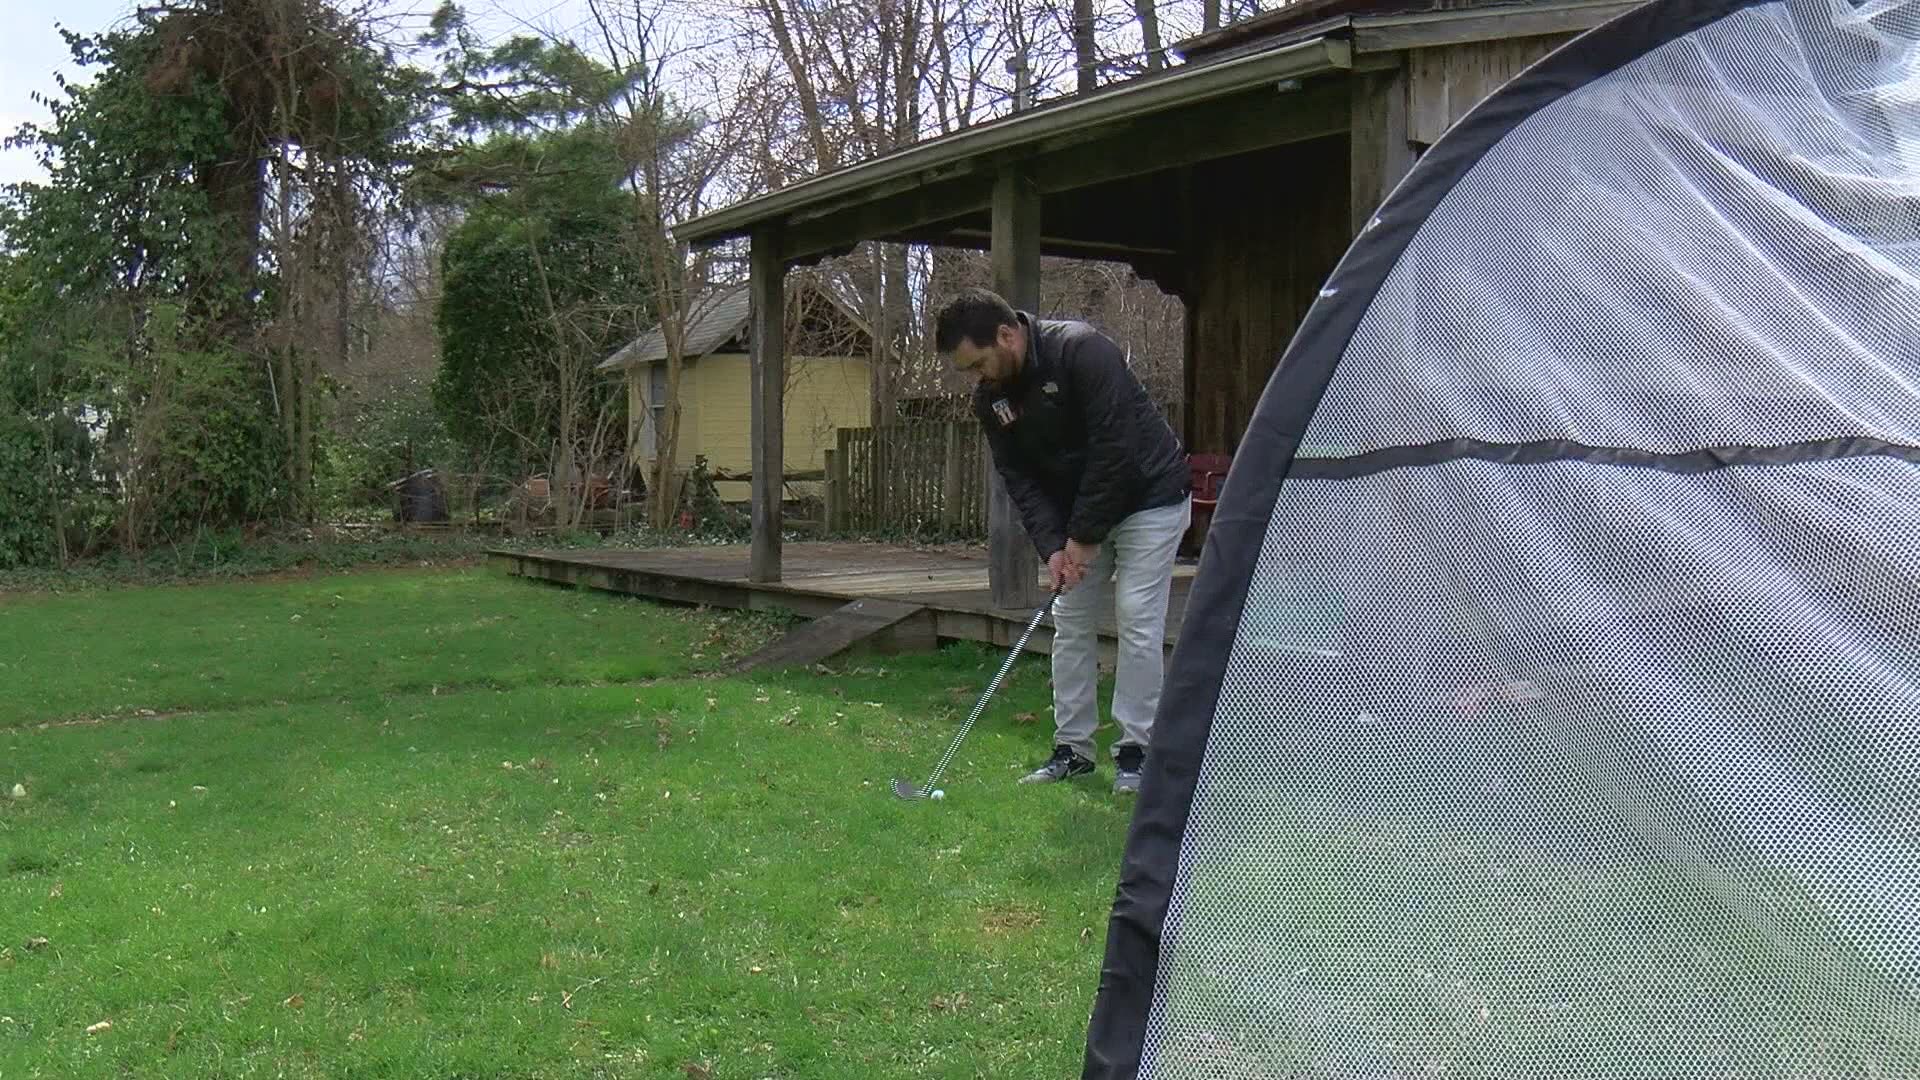 With a stay-at-home order in place, Case Hartman is quickly becoming an internet sensation with golf trick shots inside his home.